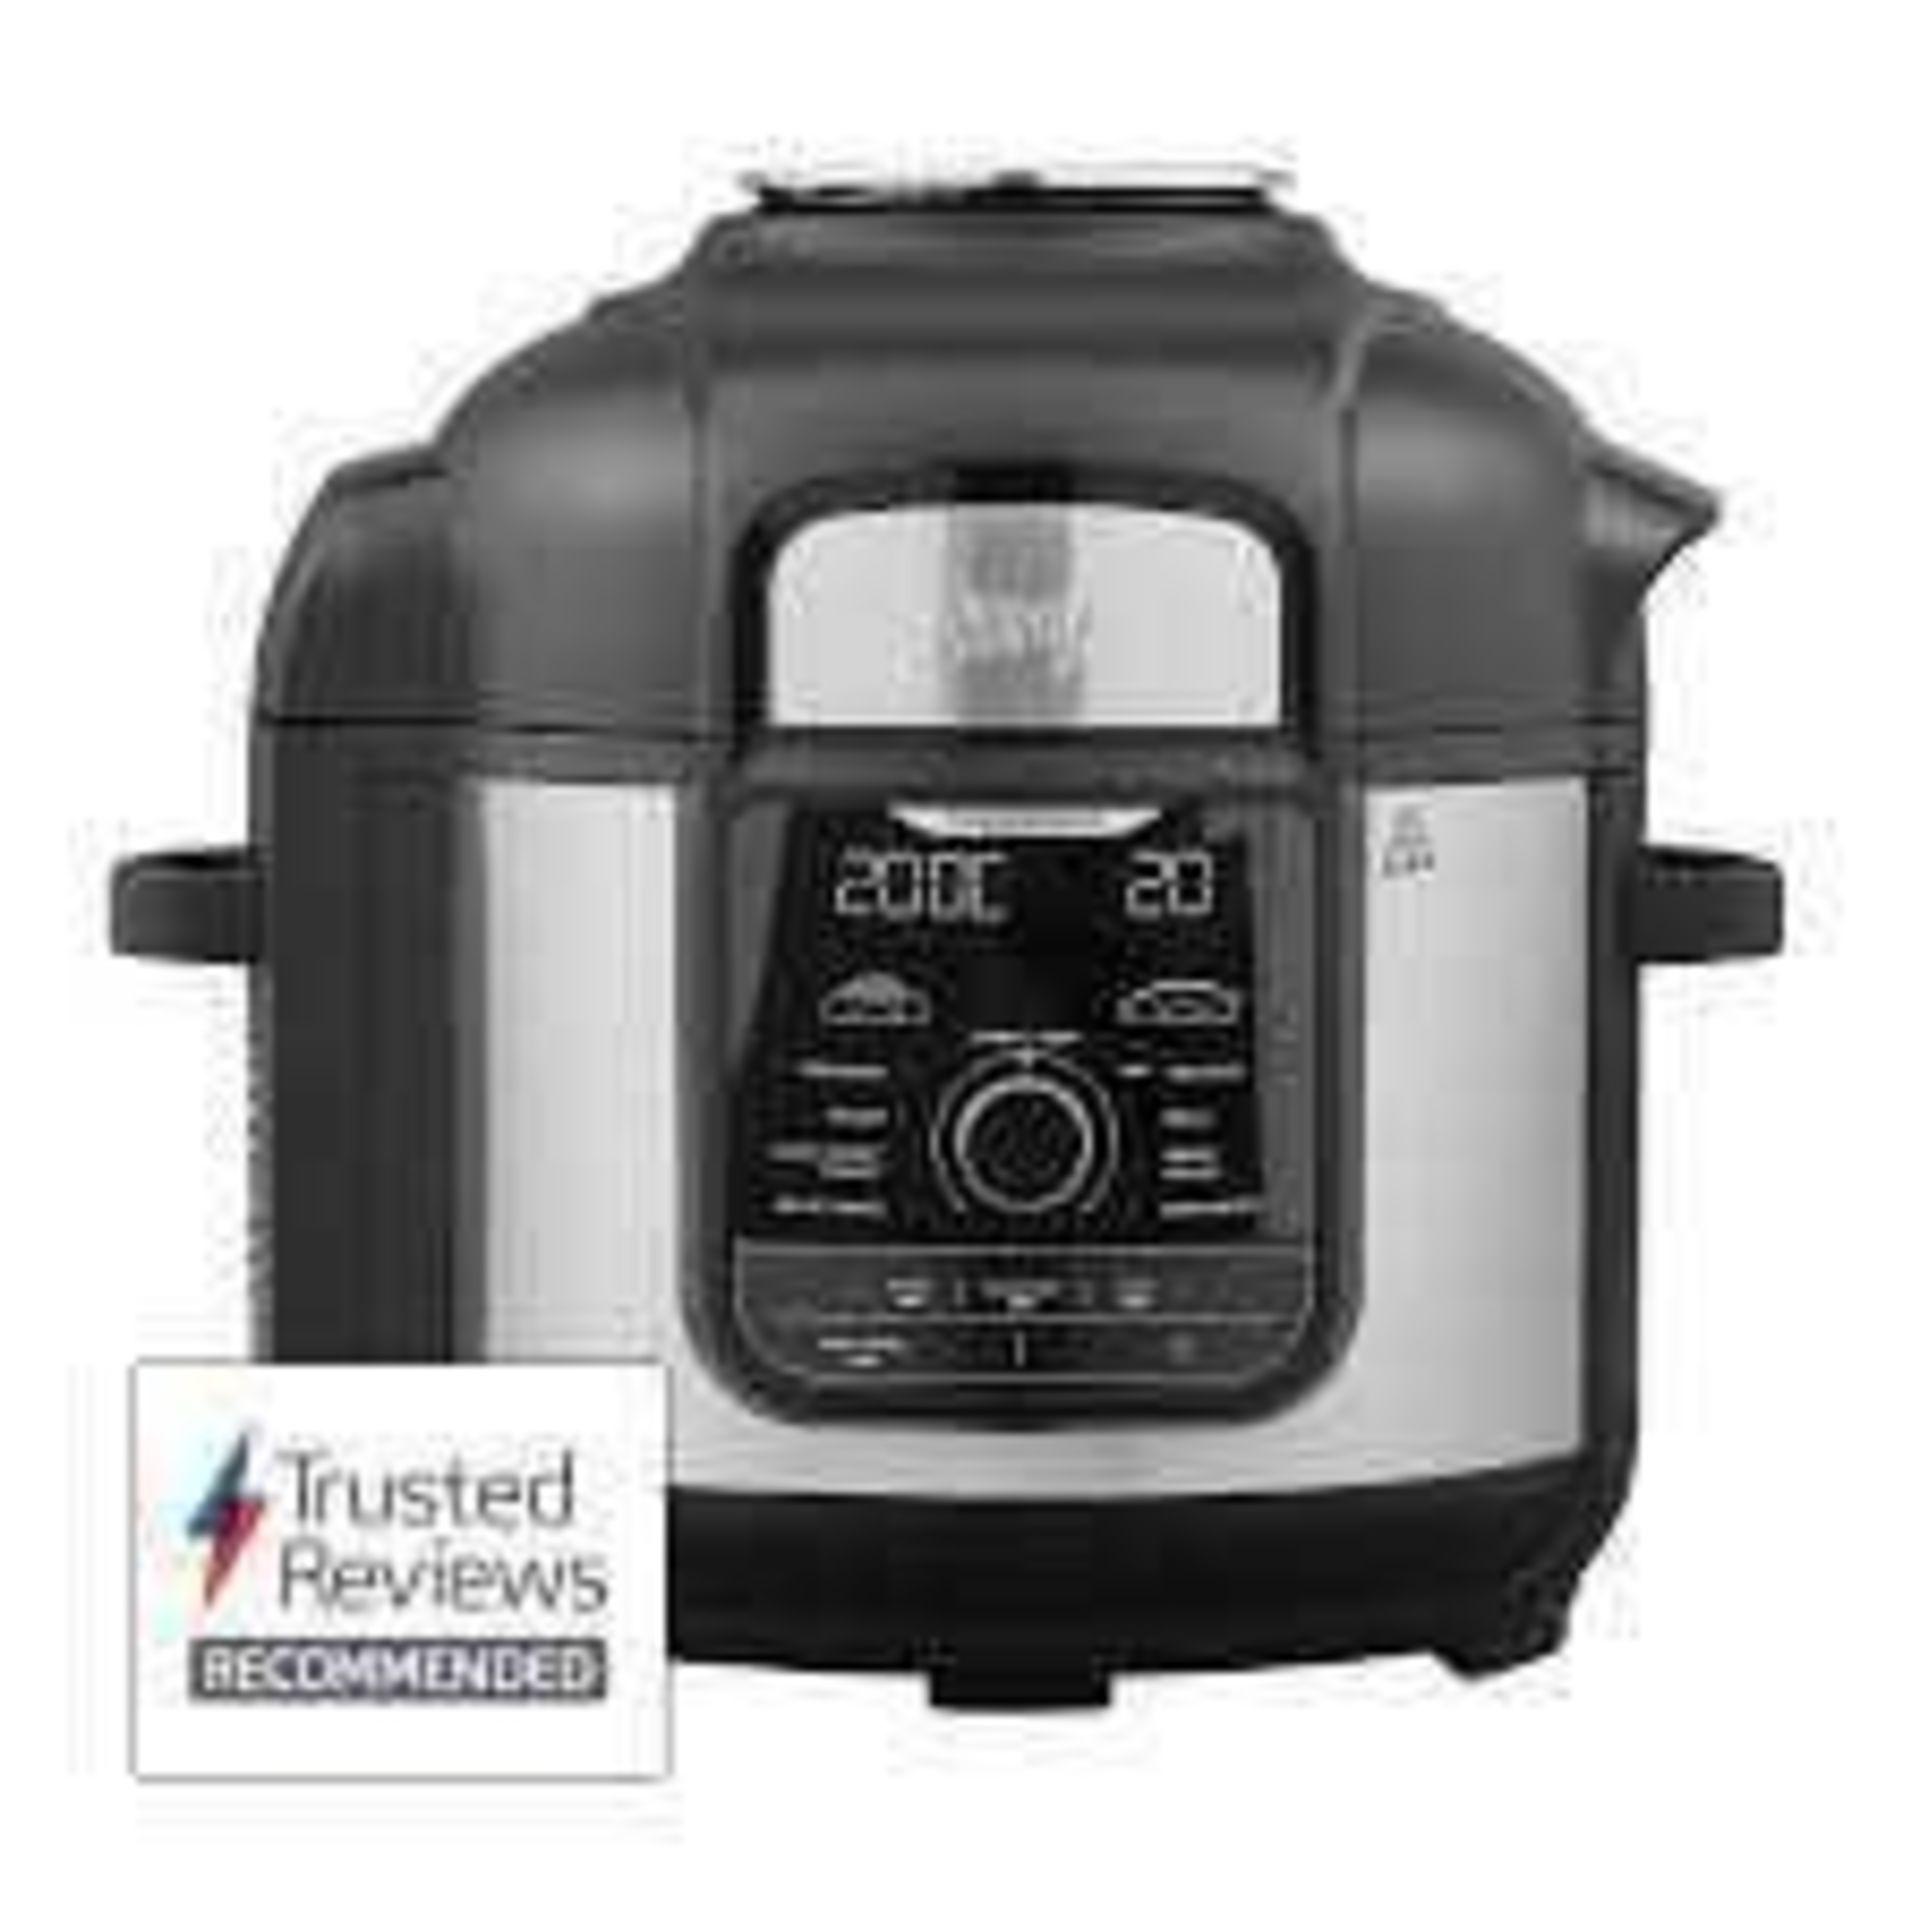 RRP £180 Boxed Ninja Foodi Max 7.5L Multi Cooker With 9 Ways To Cook